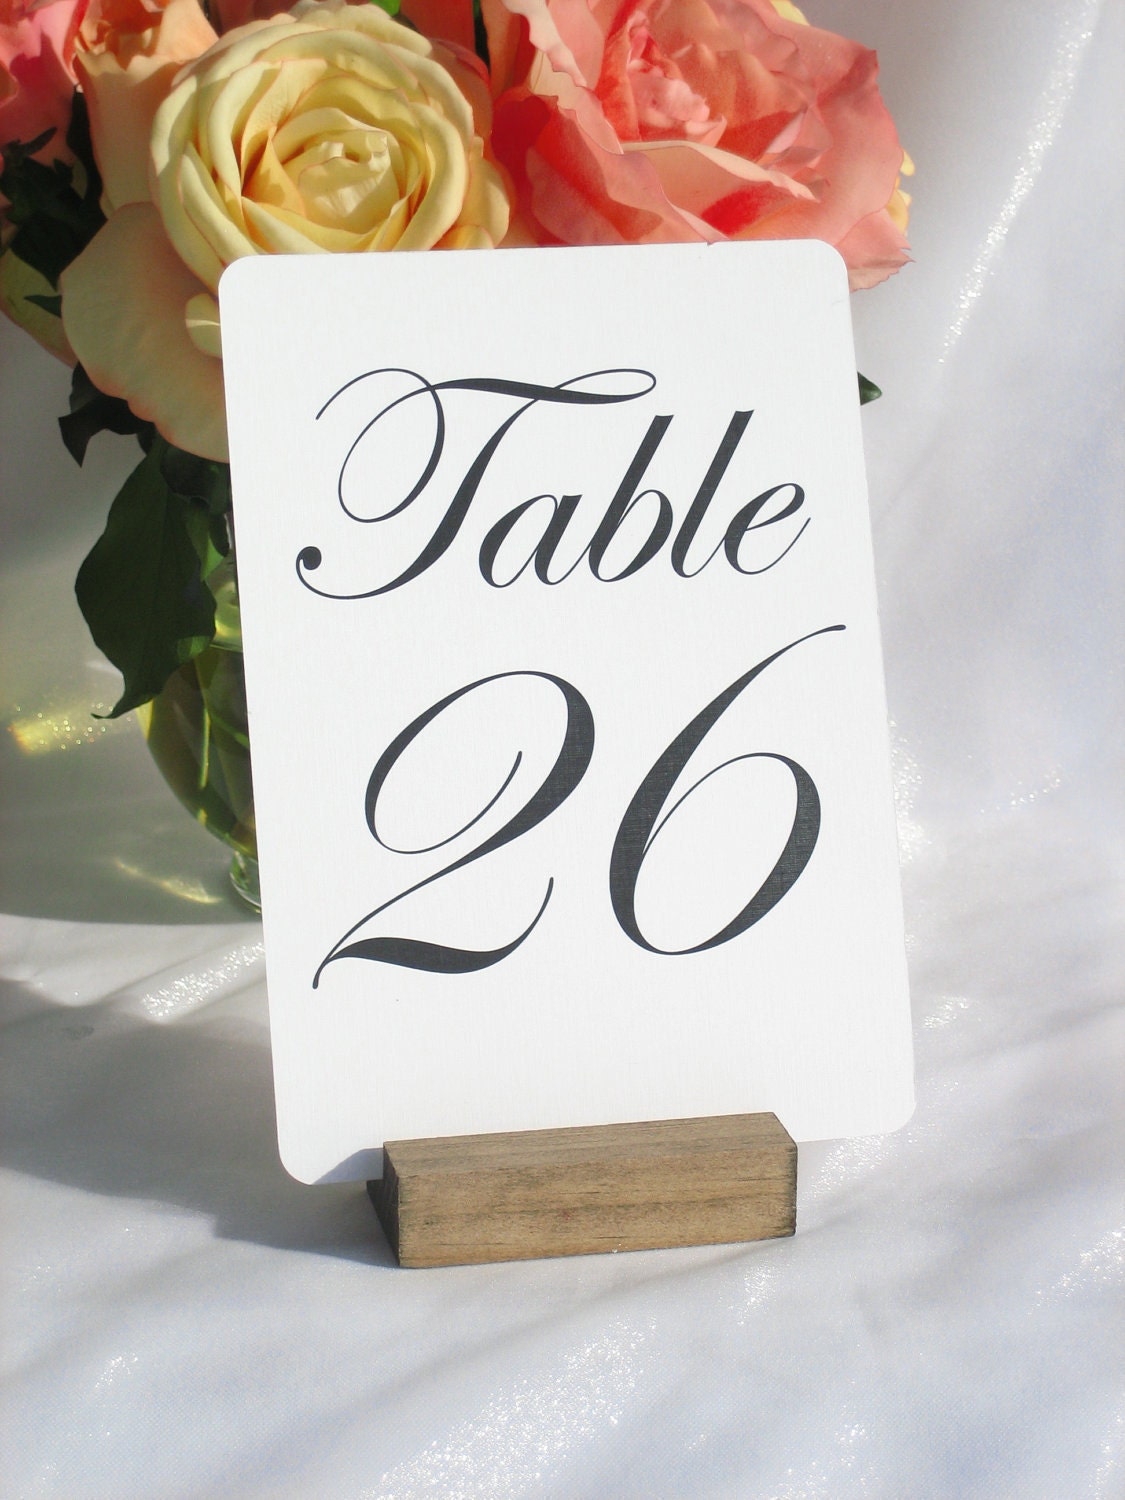 10 Gallery360 table holders Table Wedding Set Holders Rustic  Number rustic by Wood sign of